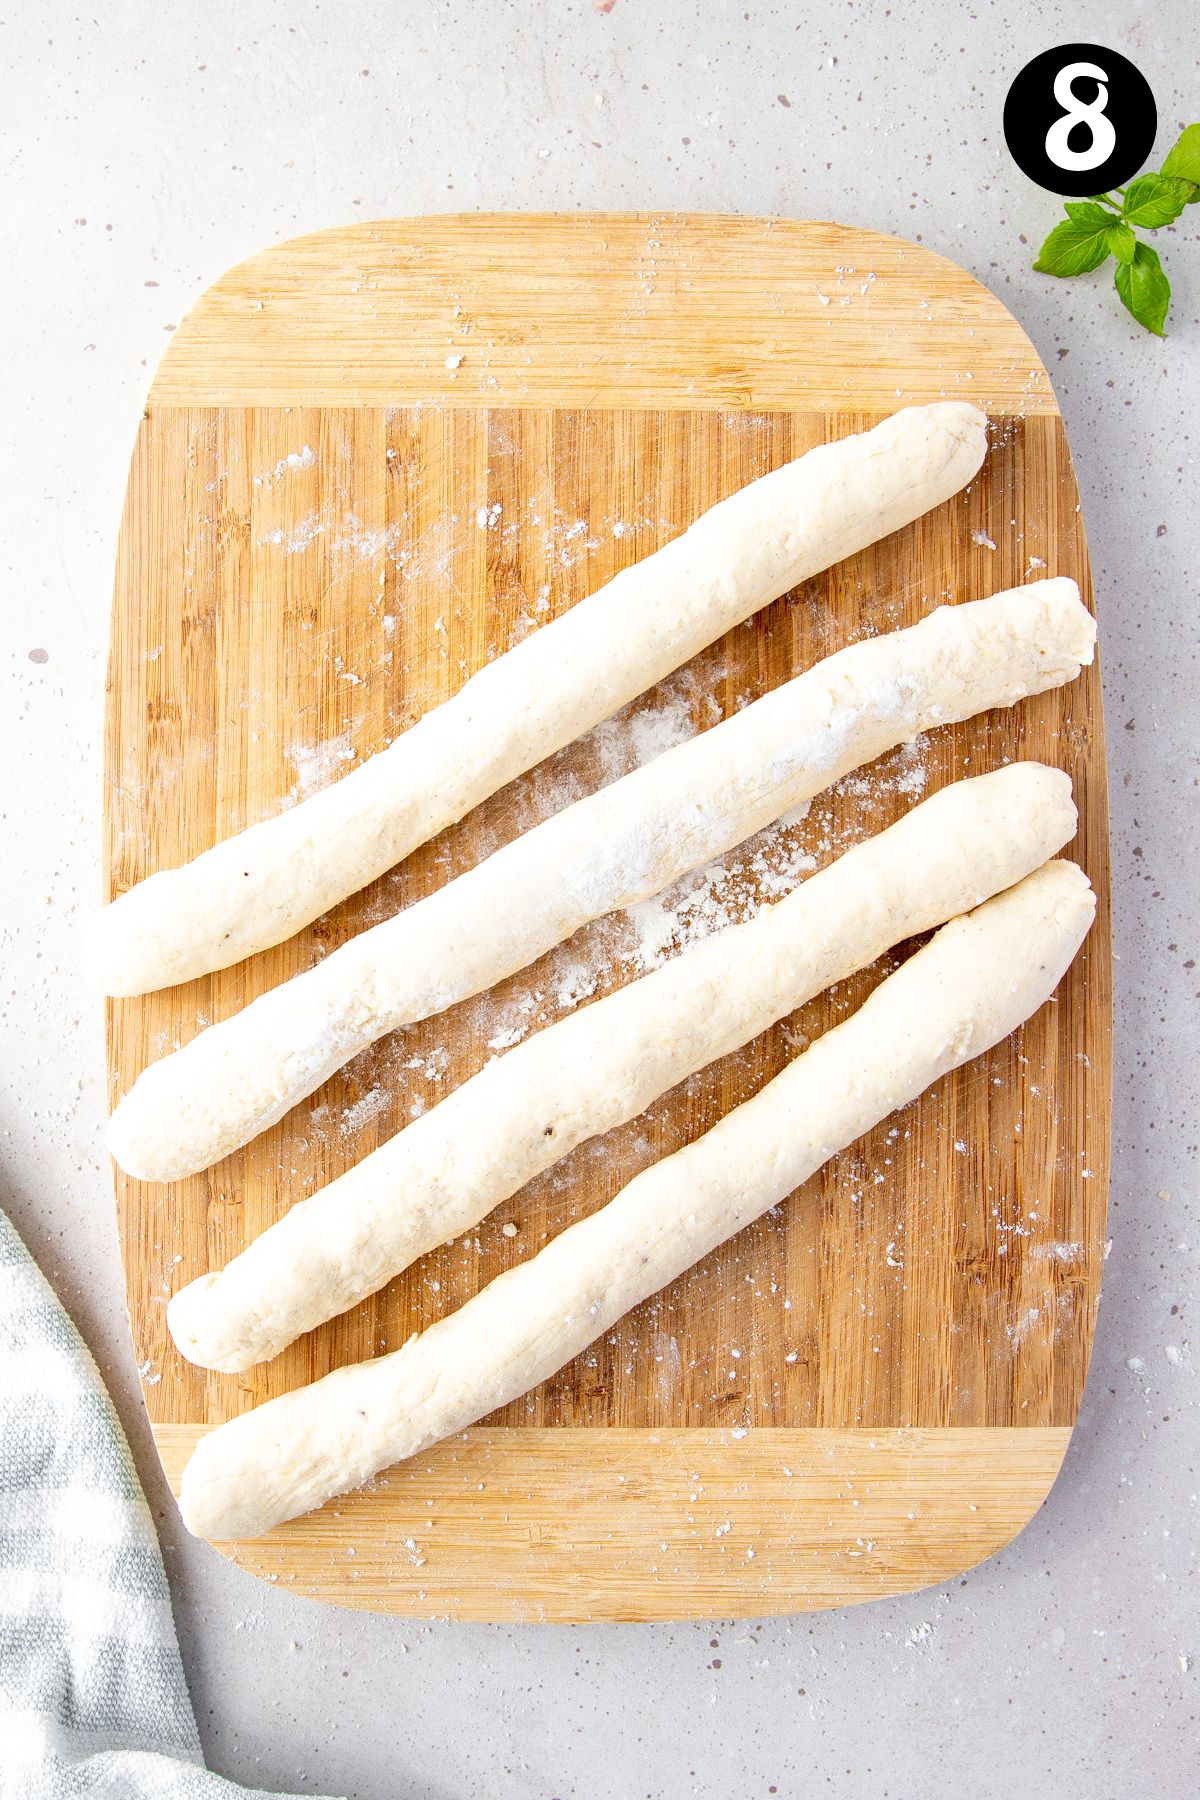 dough rolled into four rope-shaped pieces.